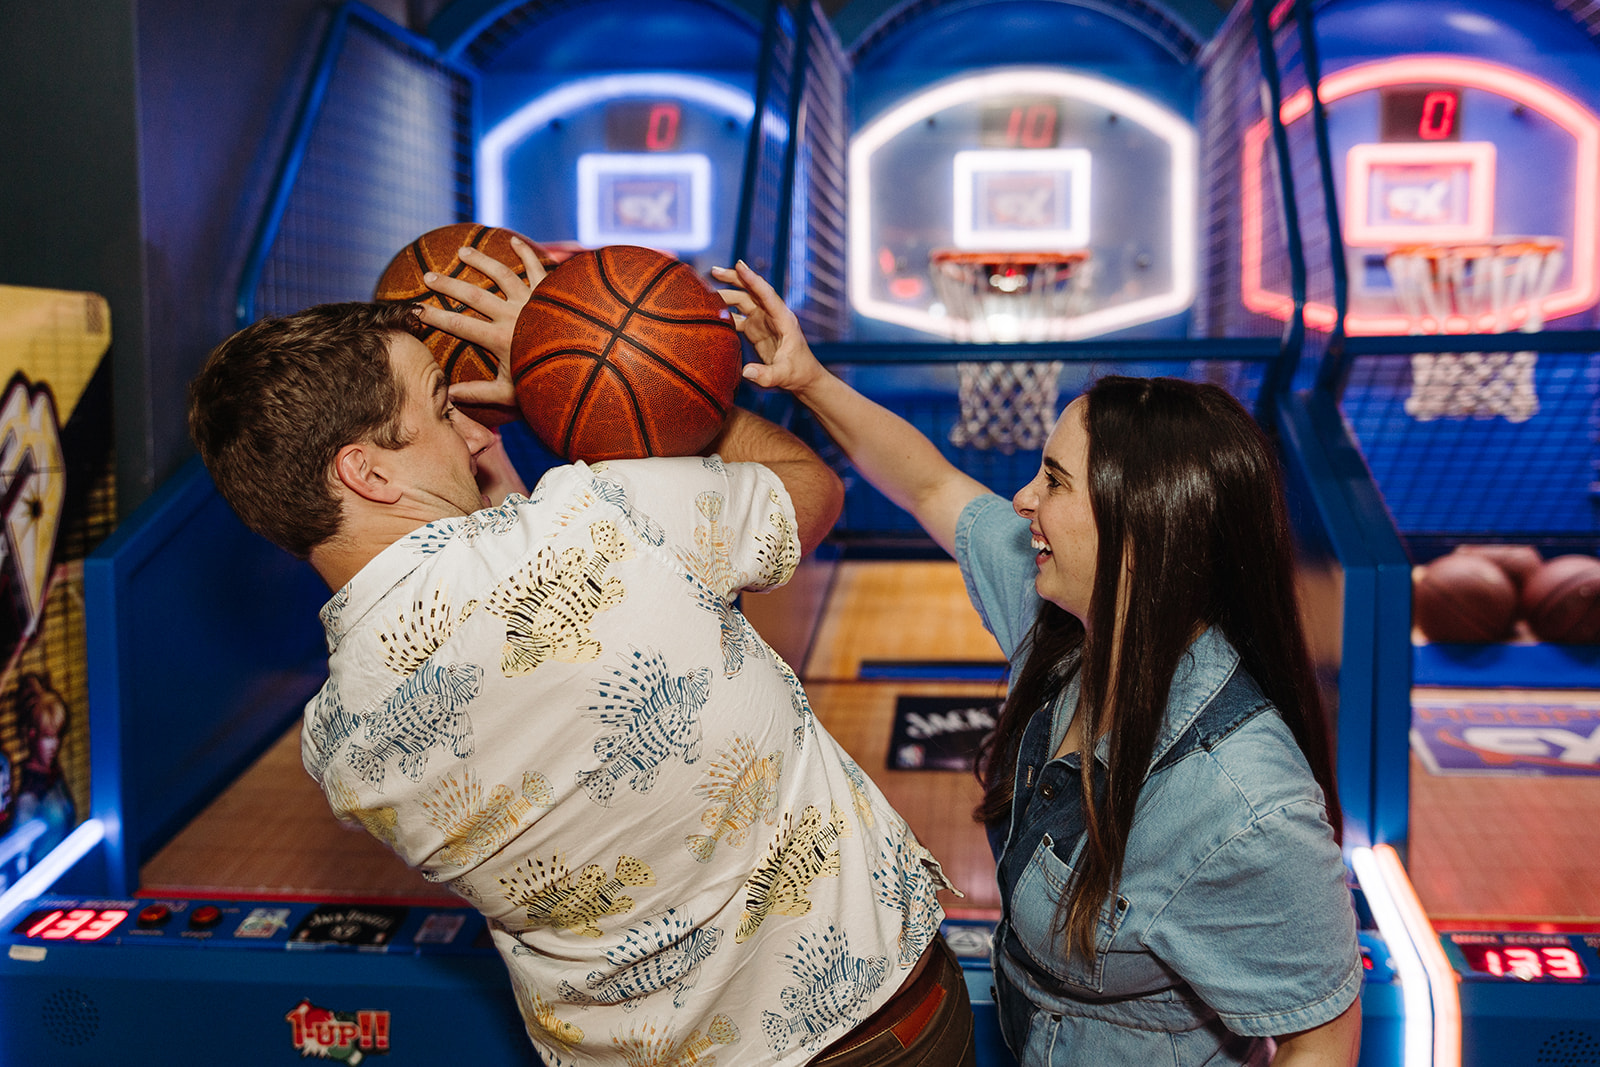 Woman playing around with her fiance as he gets ready to shoot a basketball at a Denver arcade